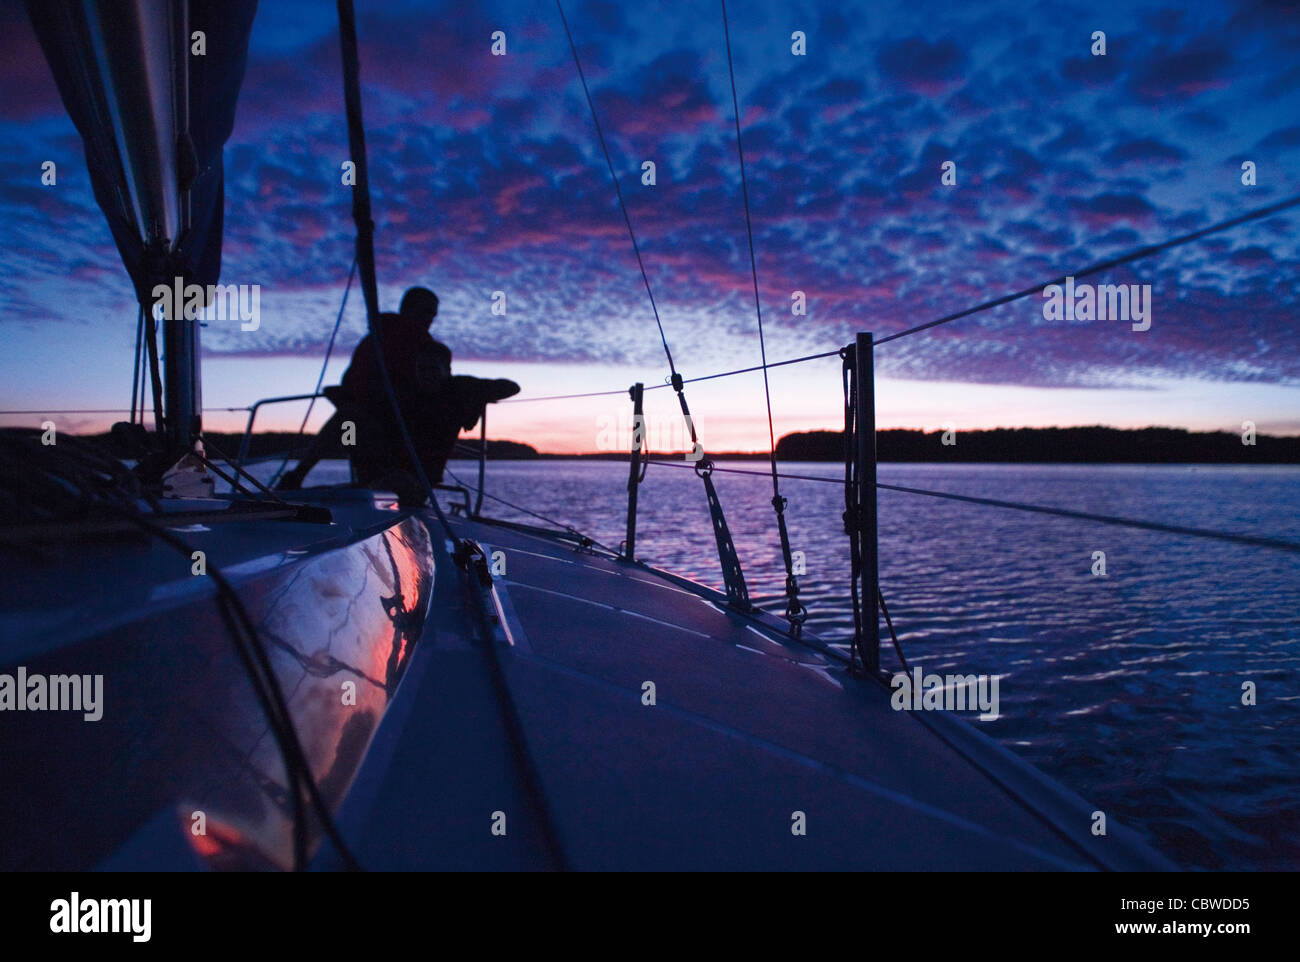 taken at the evening on sailing yacht Stock Photo